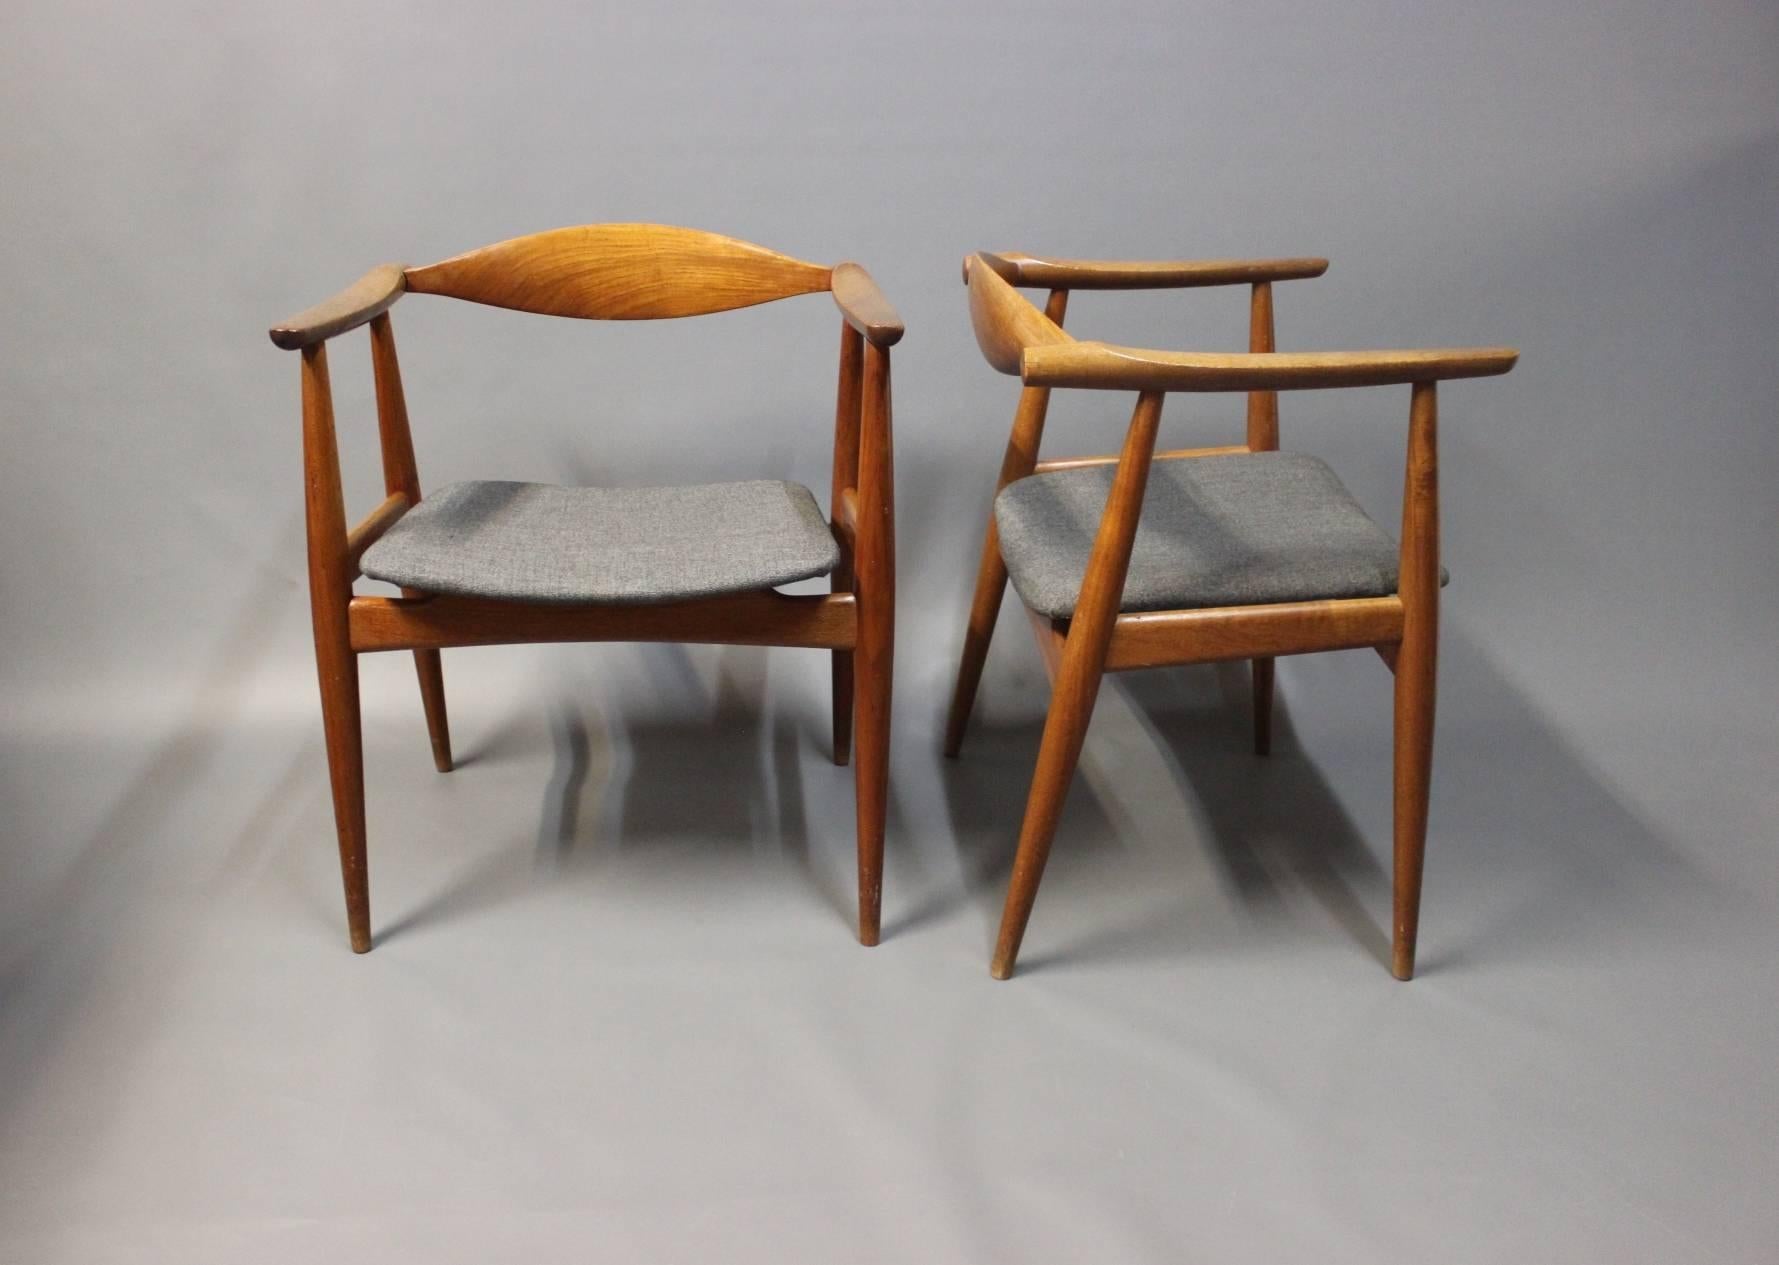 A pair of dining room chairs, model CH-35, designed by Hans J. Wegner in 1959 and manufactured by Carl Hansen & Søn in the 1960s. The chairs are in teak and upholstered in grey wool.